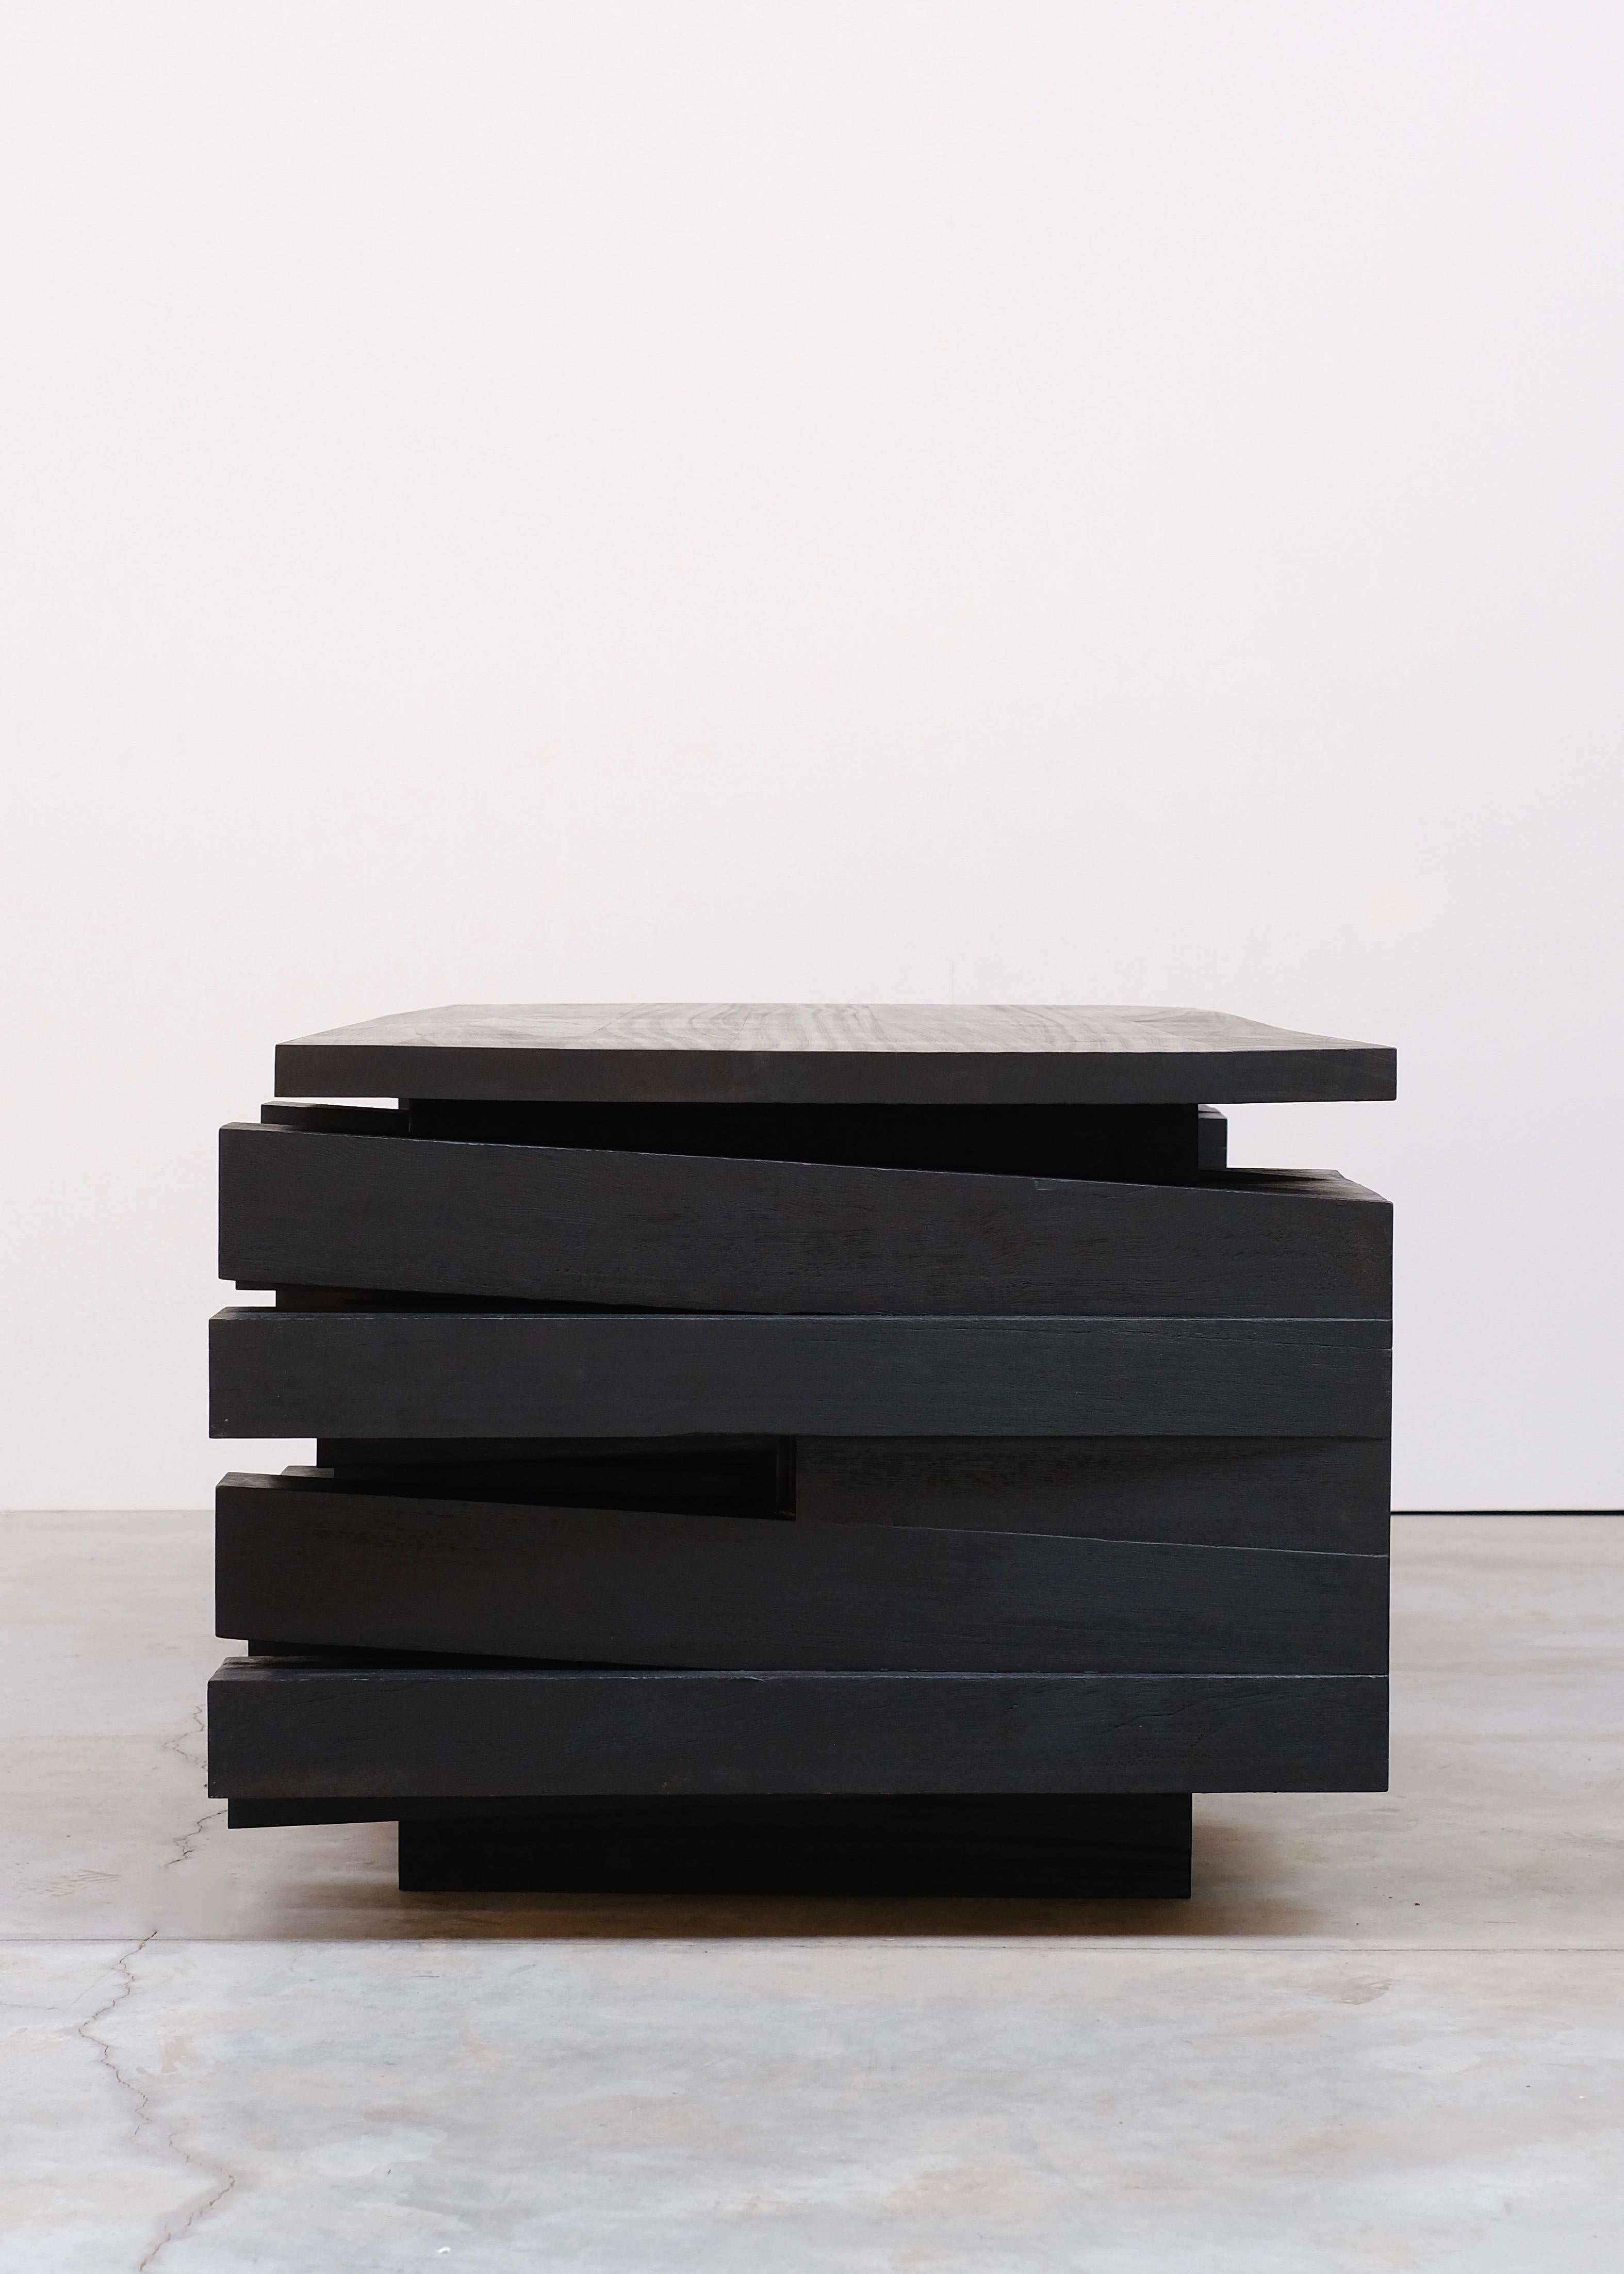 Collectible Desk by Arno Declercq, Edition of 12 2